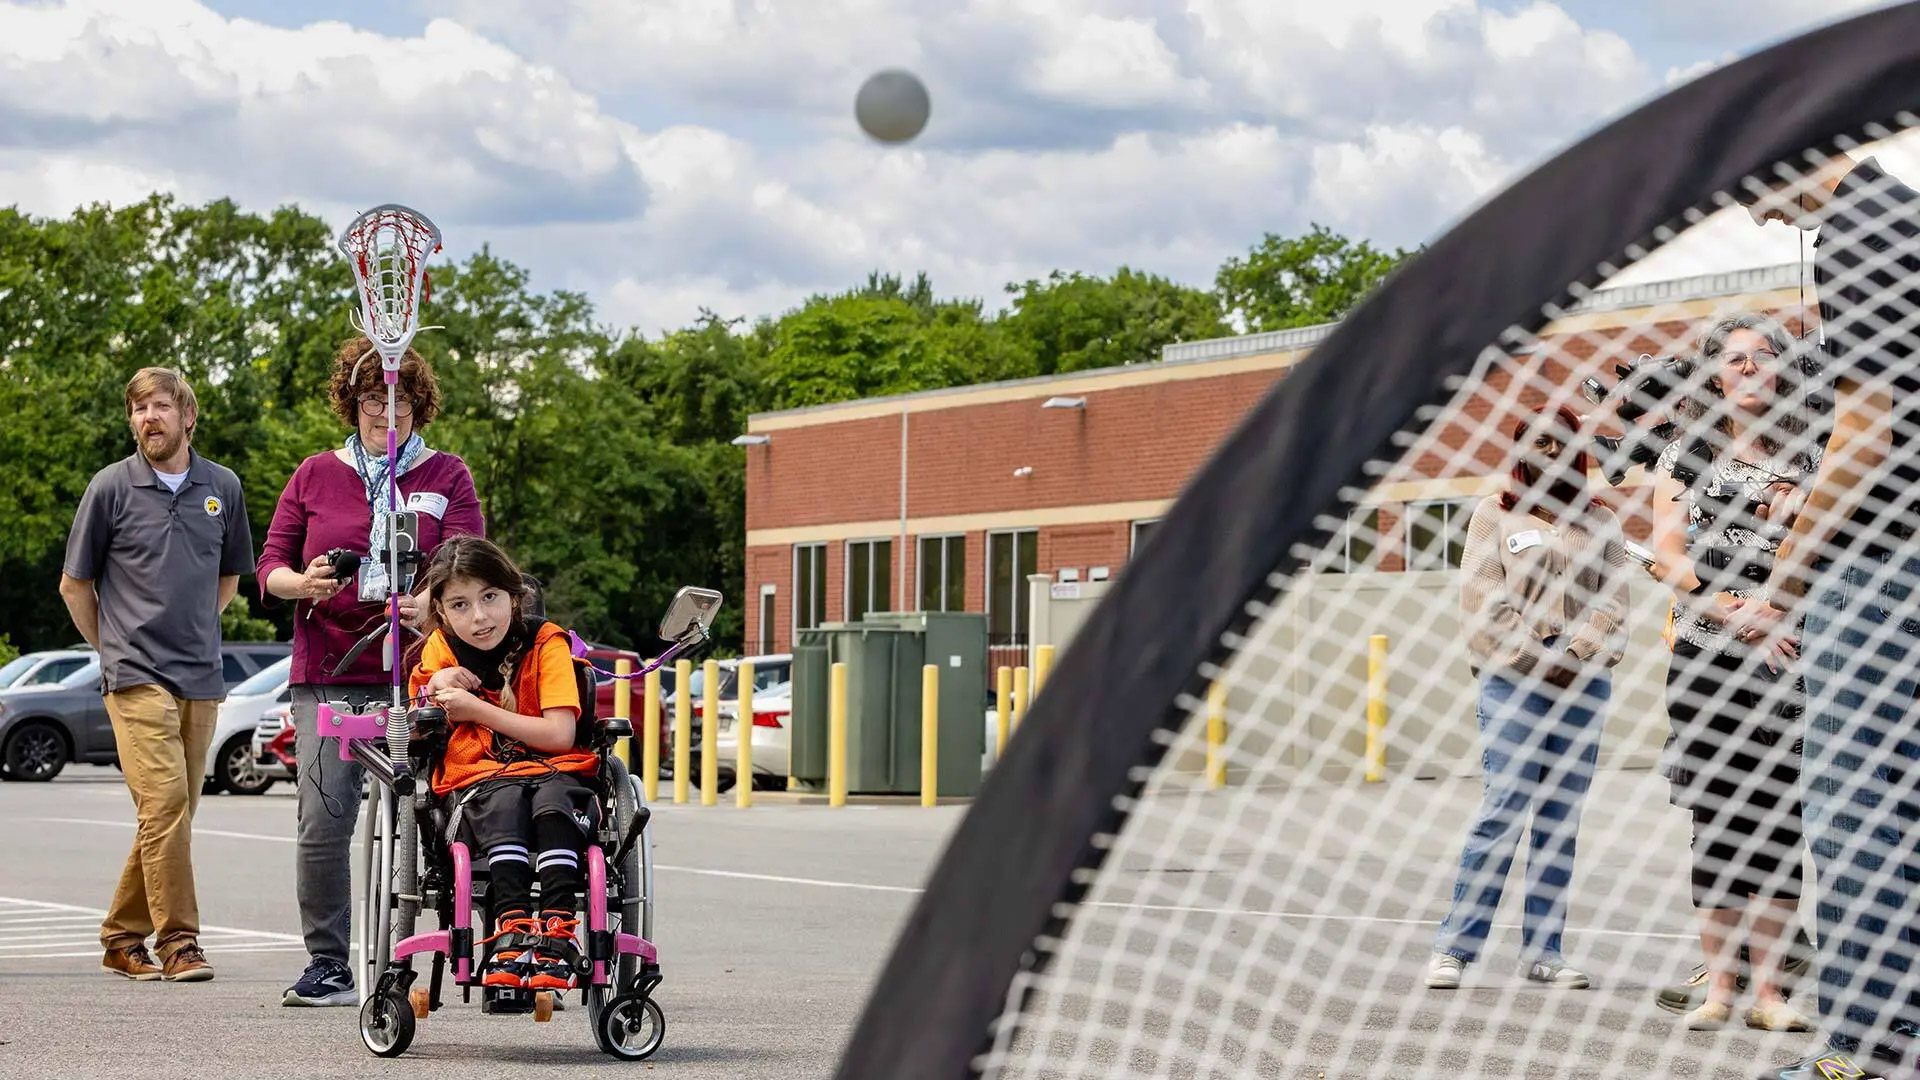 Stella Stakolosa launches a ball into the net using an adaptive lacrosse stick designed by College Park Academy students, led by teacher Brendan McCarthy (left), as part of the Engineering for Us All program.